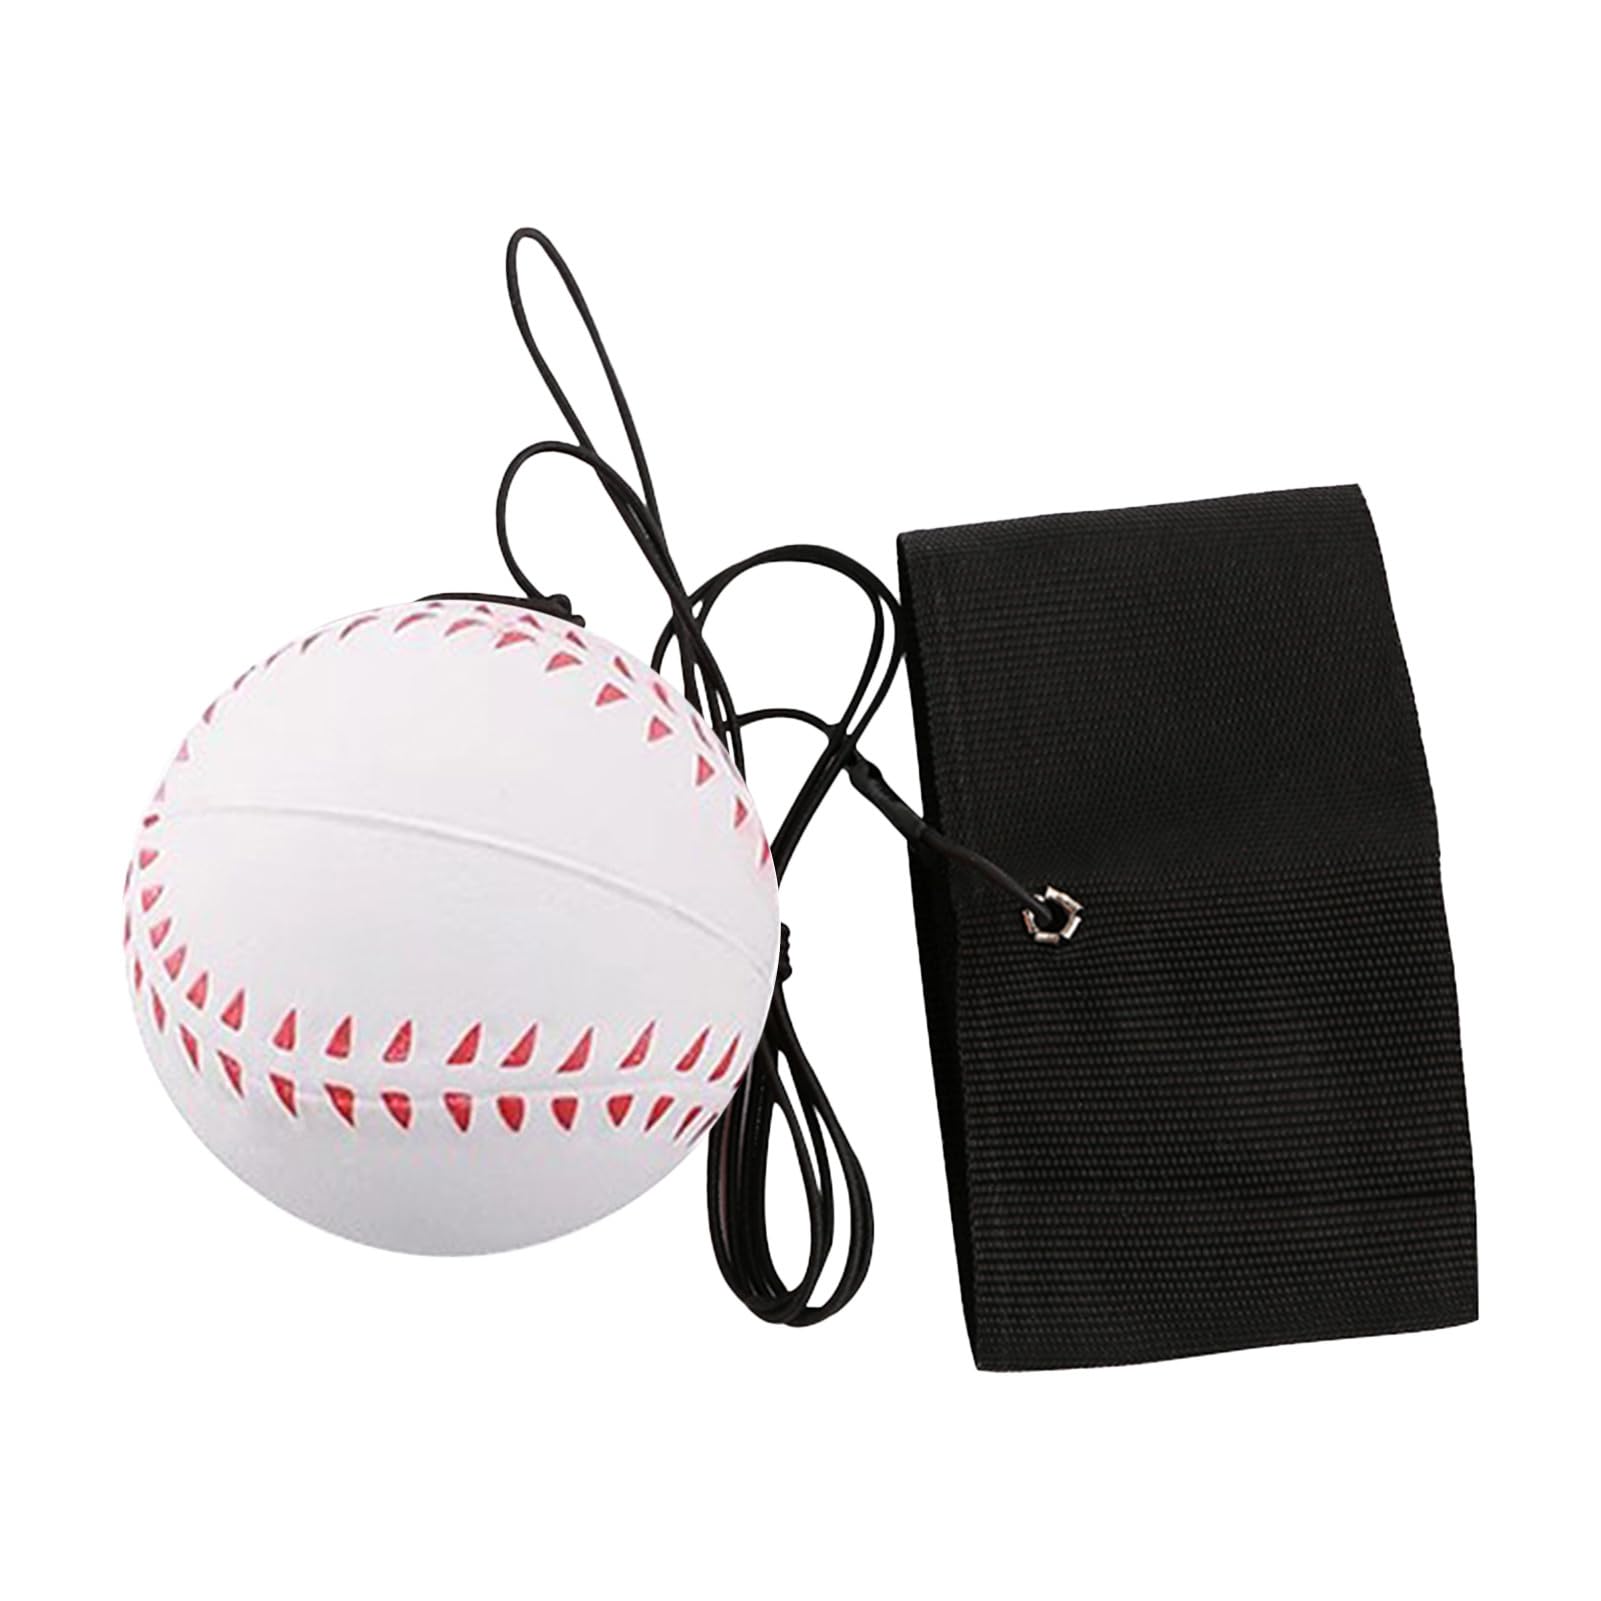 Wrist Return Ball, 2.36 Inch Sports Wrist Balls on a String, Rubber Rebound Bouncy Wristband Balls on Elastic String for Wrist Exercise or Play (Basketball, Tennis, Baseball and Football)